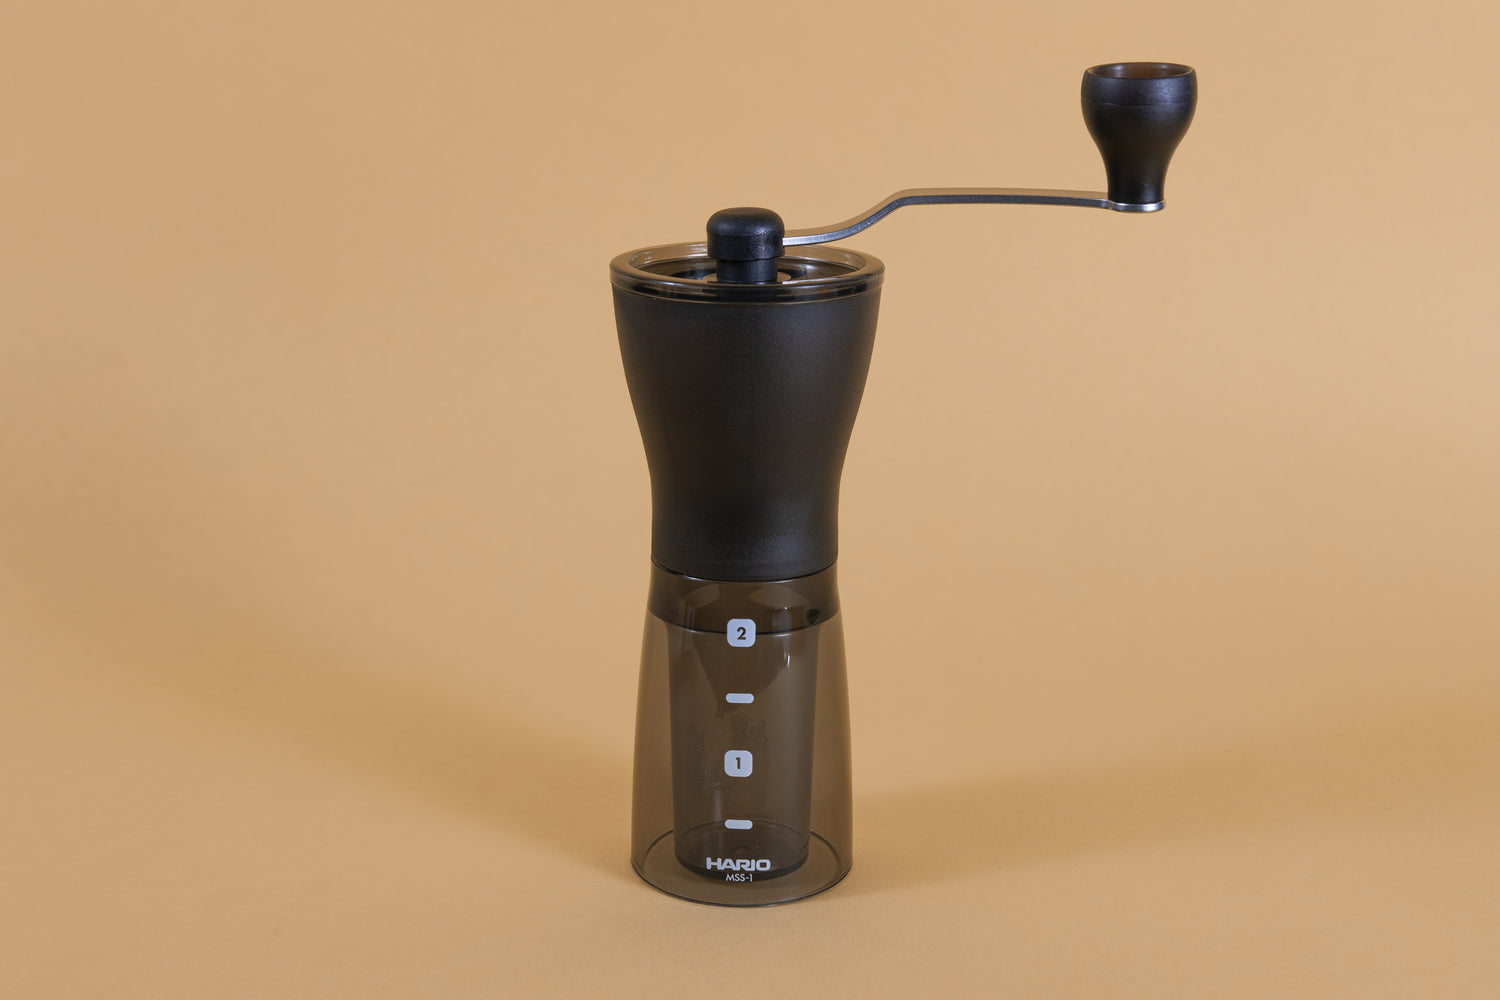 Slim black plastic Coffee Mill with handle atop a dark transparent plastic container with two level markings on an orange backdrop